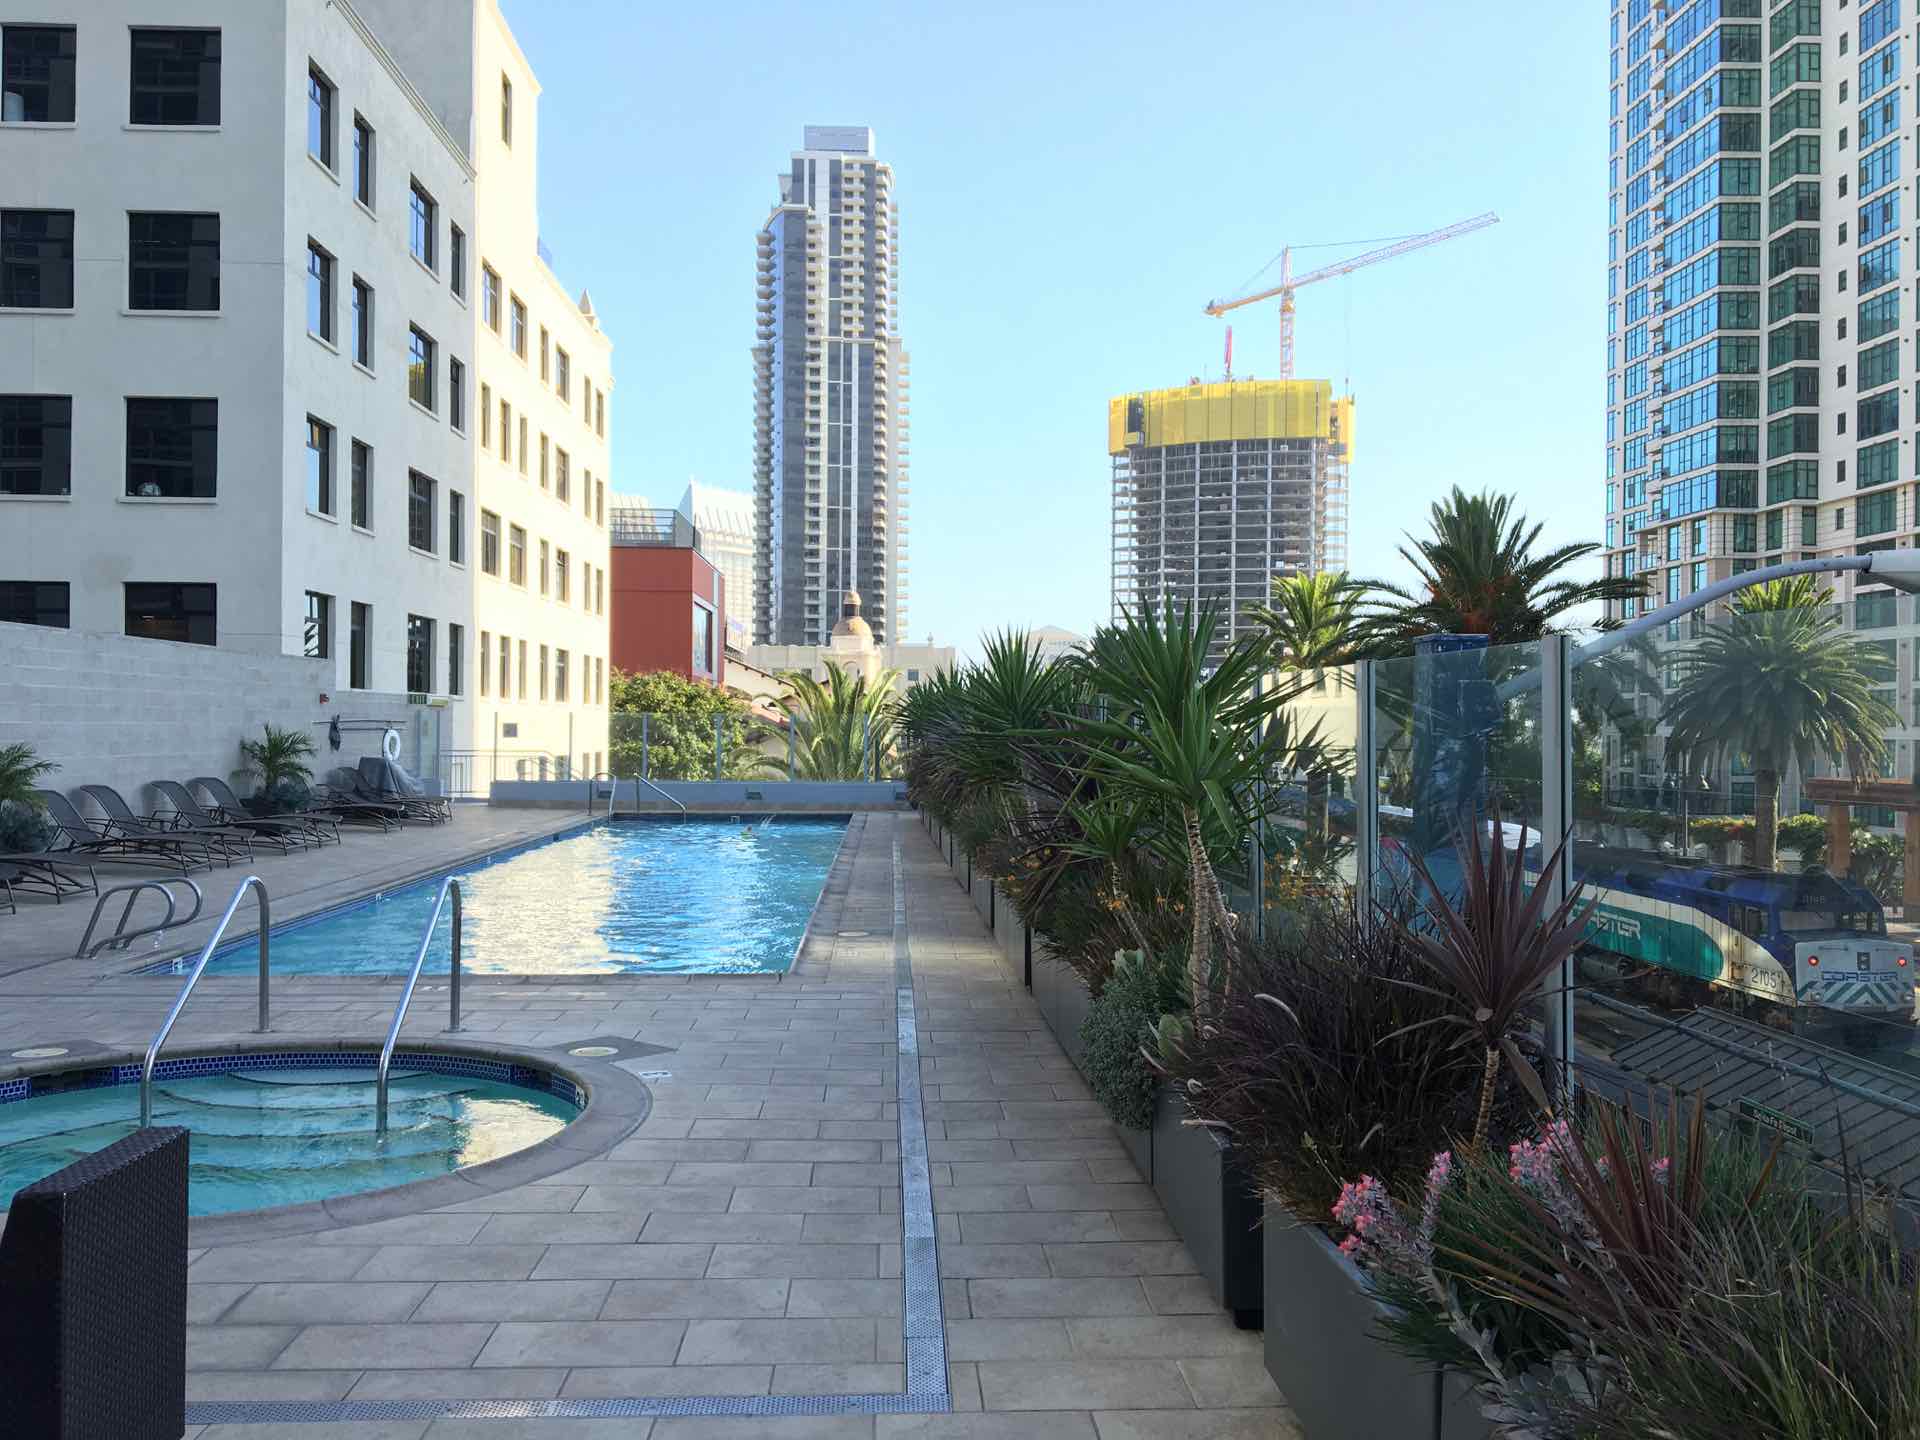 Pool Deck at Sapphire Tower